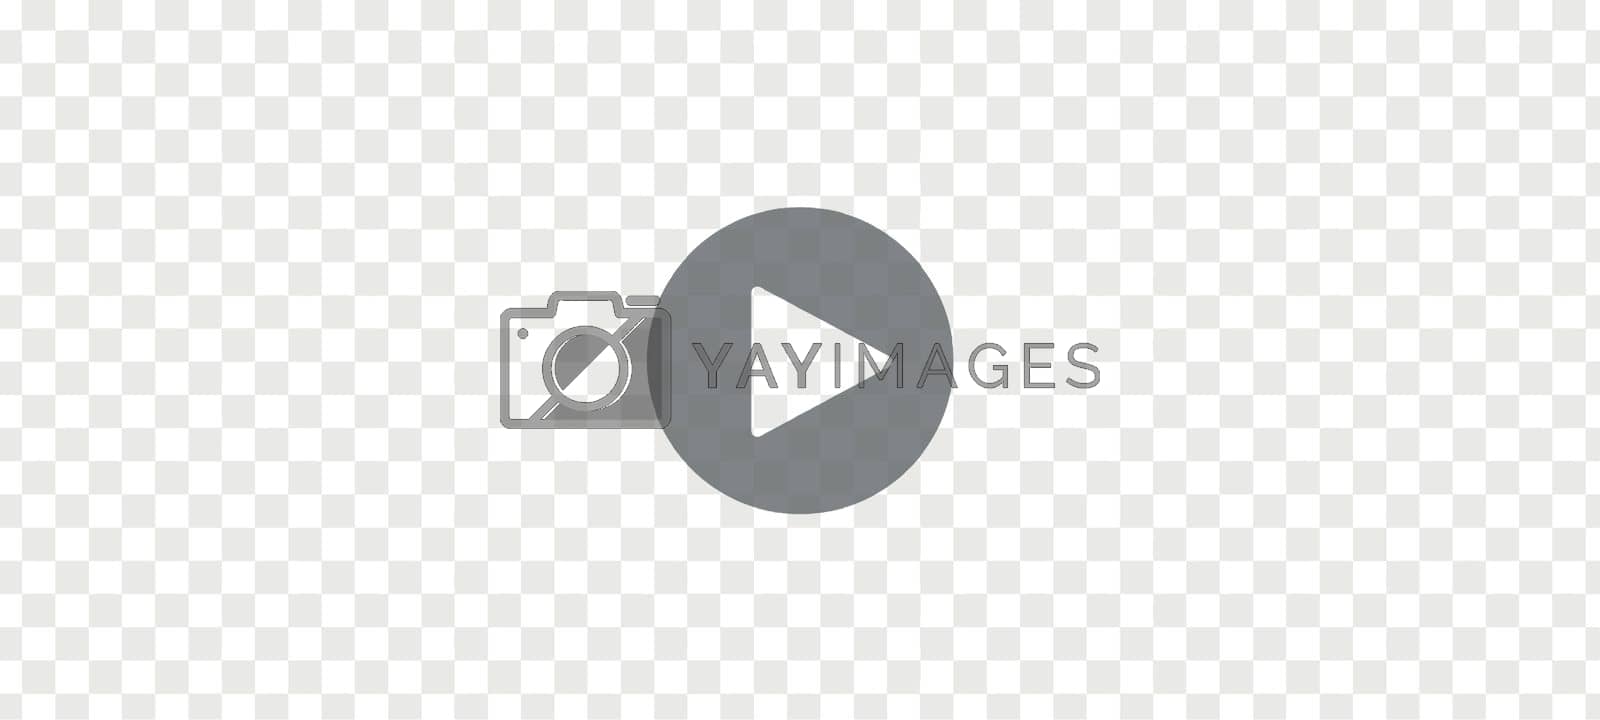 Royalty free image of Play button icon on transparent background. Player video symbol. Vector illustration by vikalost